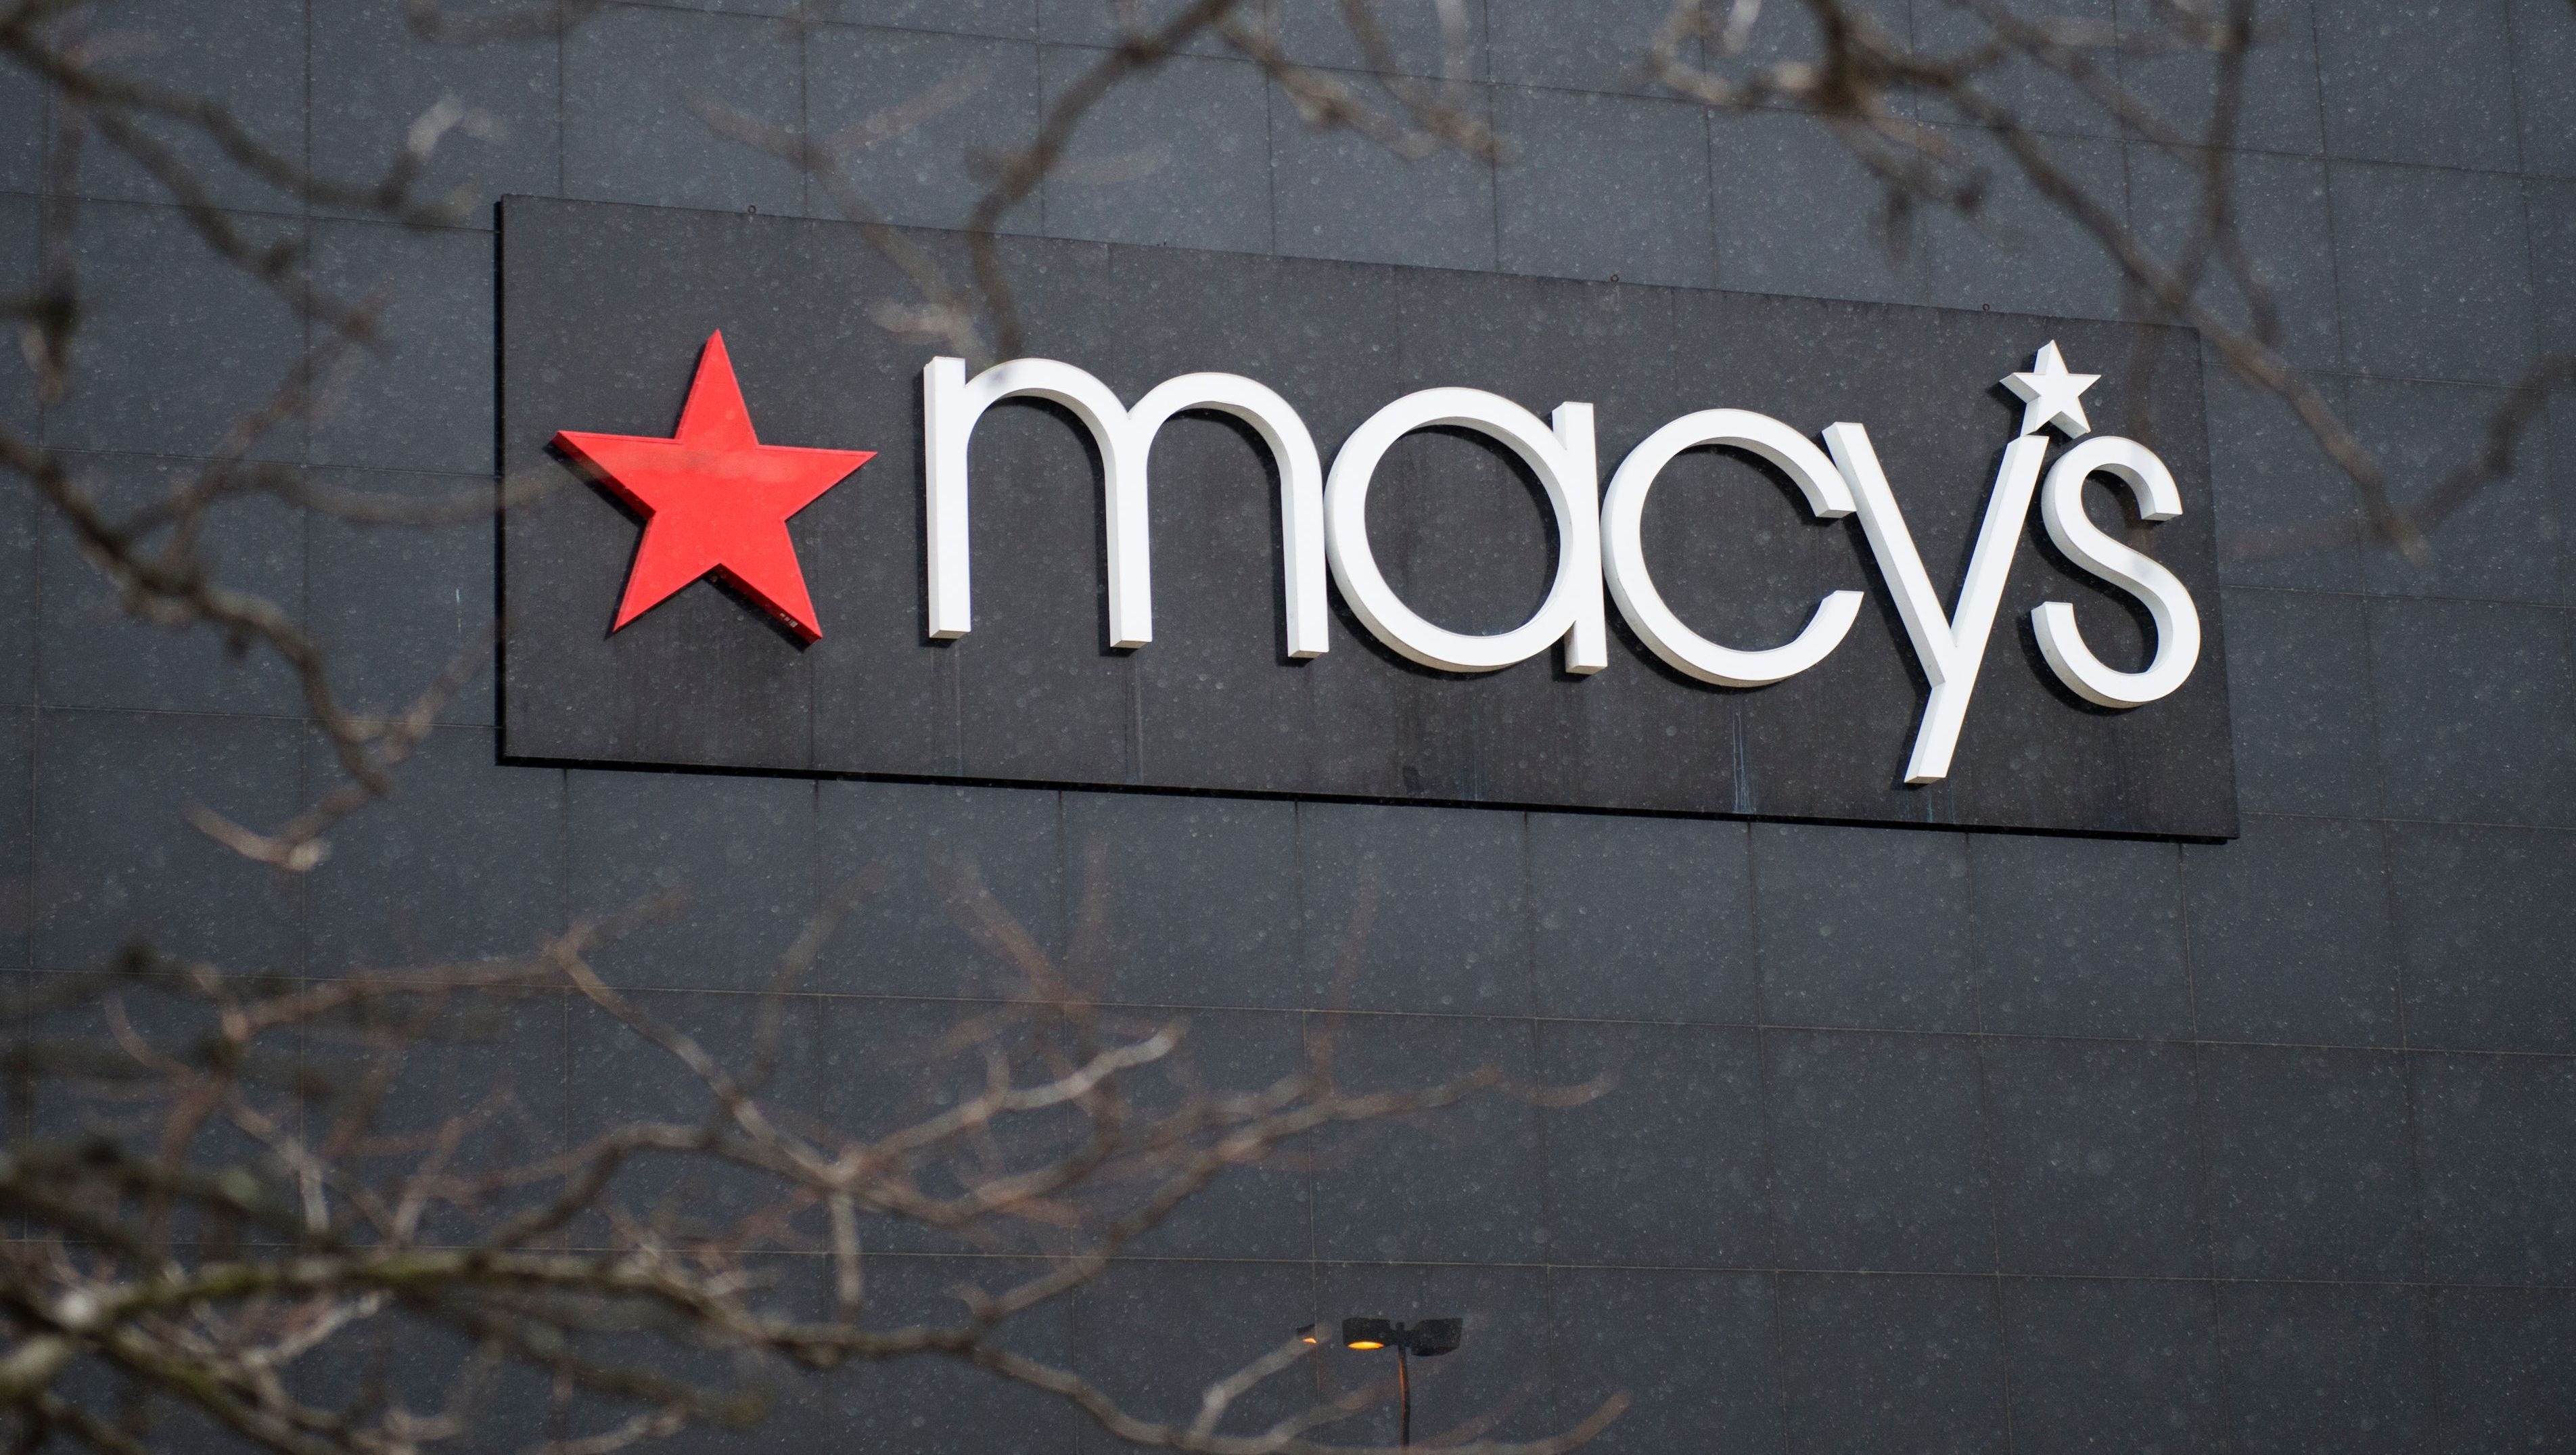 Macy’s planning to close down on a few stores as per reports